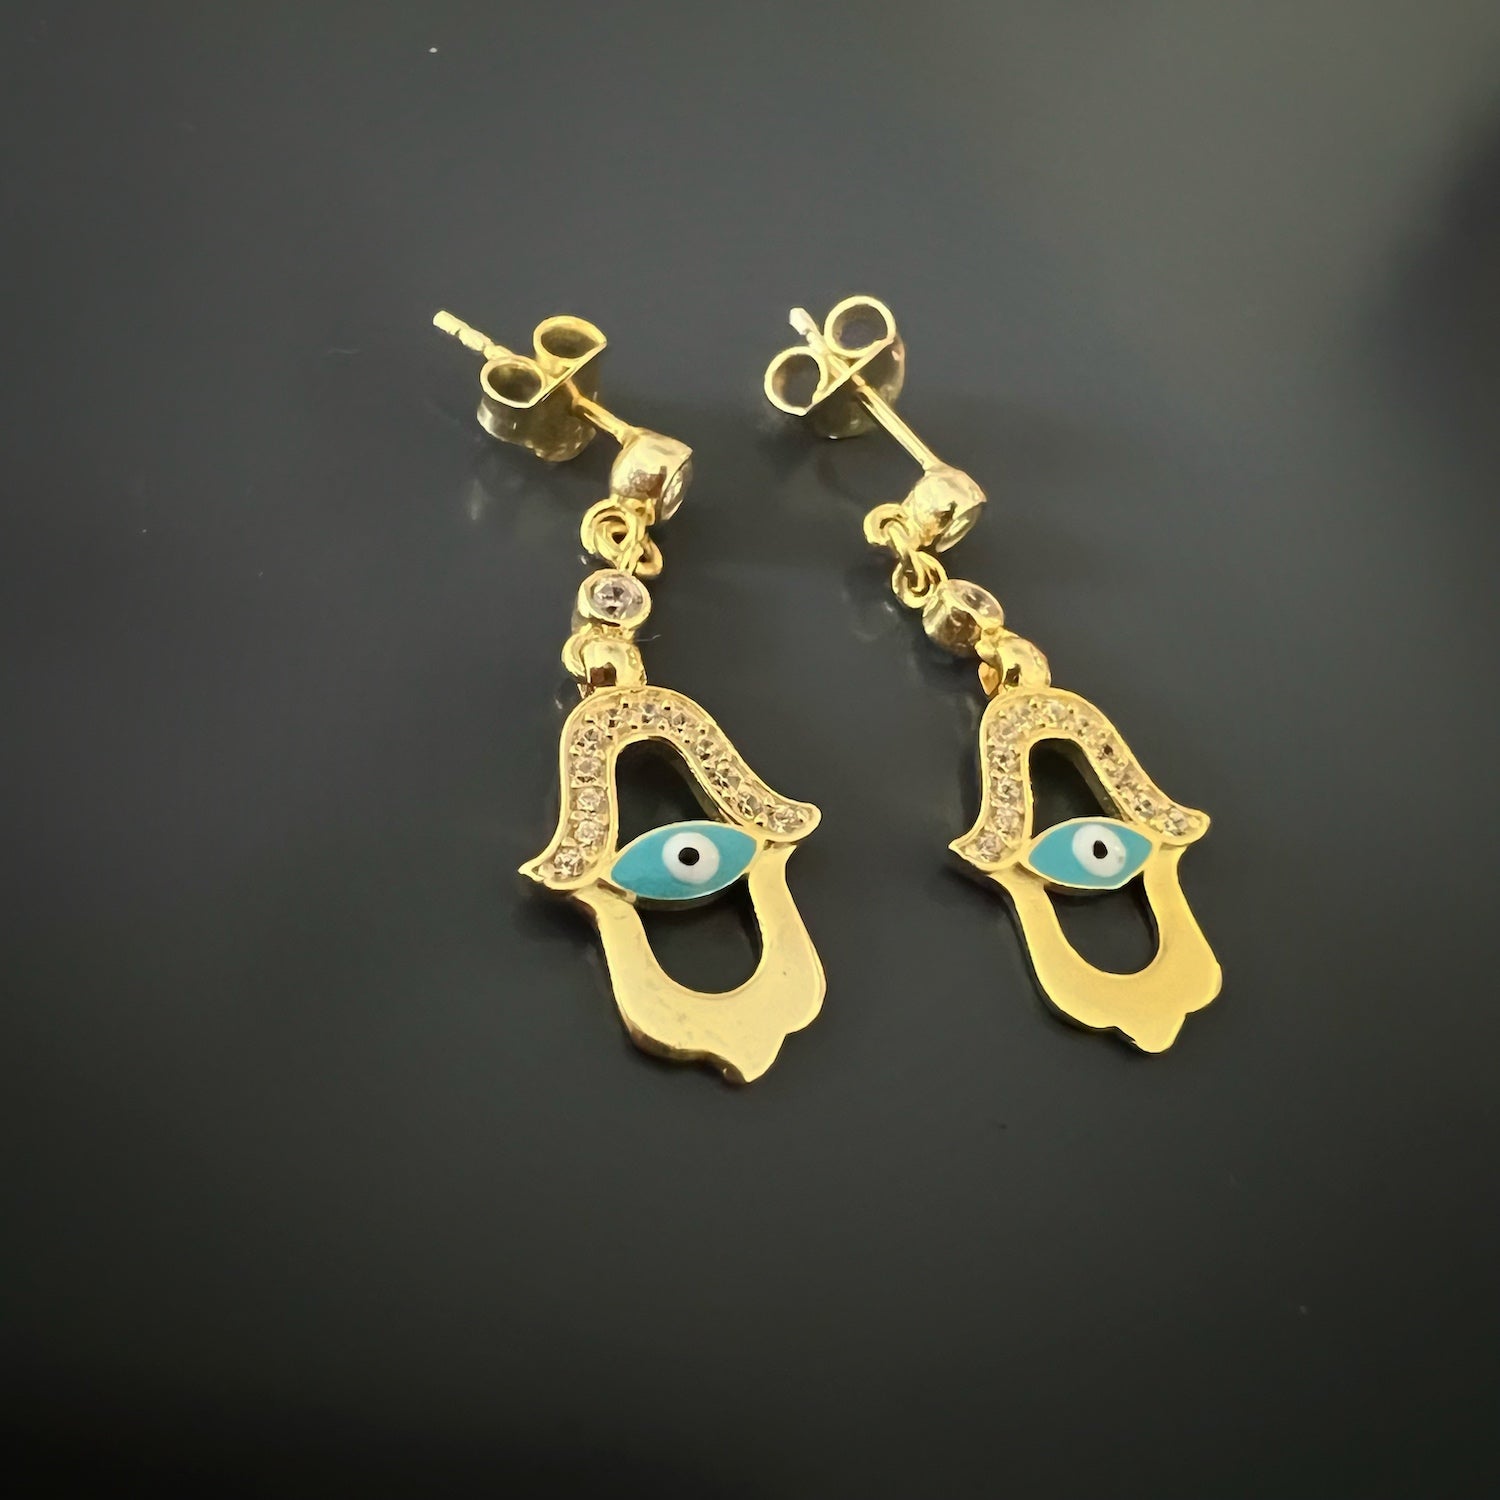 Luxurious sterling silver earrings plated in 18K gold, showcasing the vibrant turquoise enamel Evil Eye and Hamsa symbols